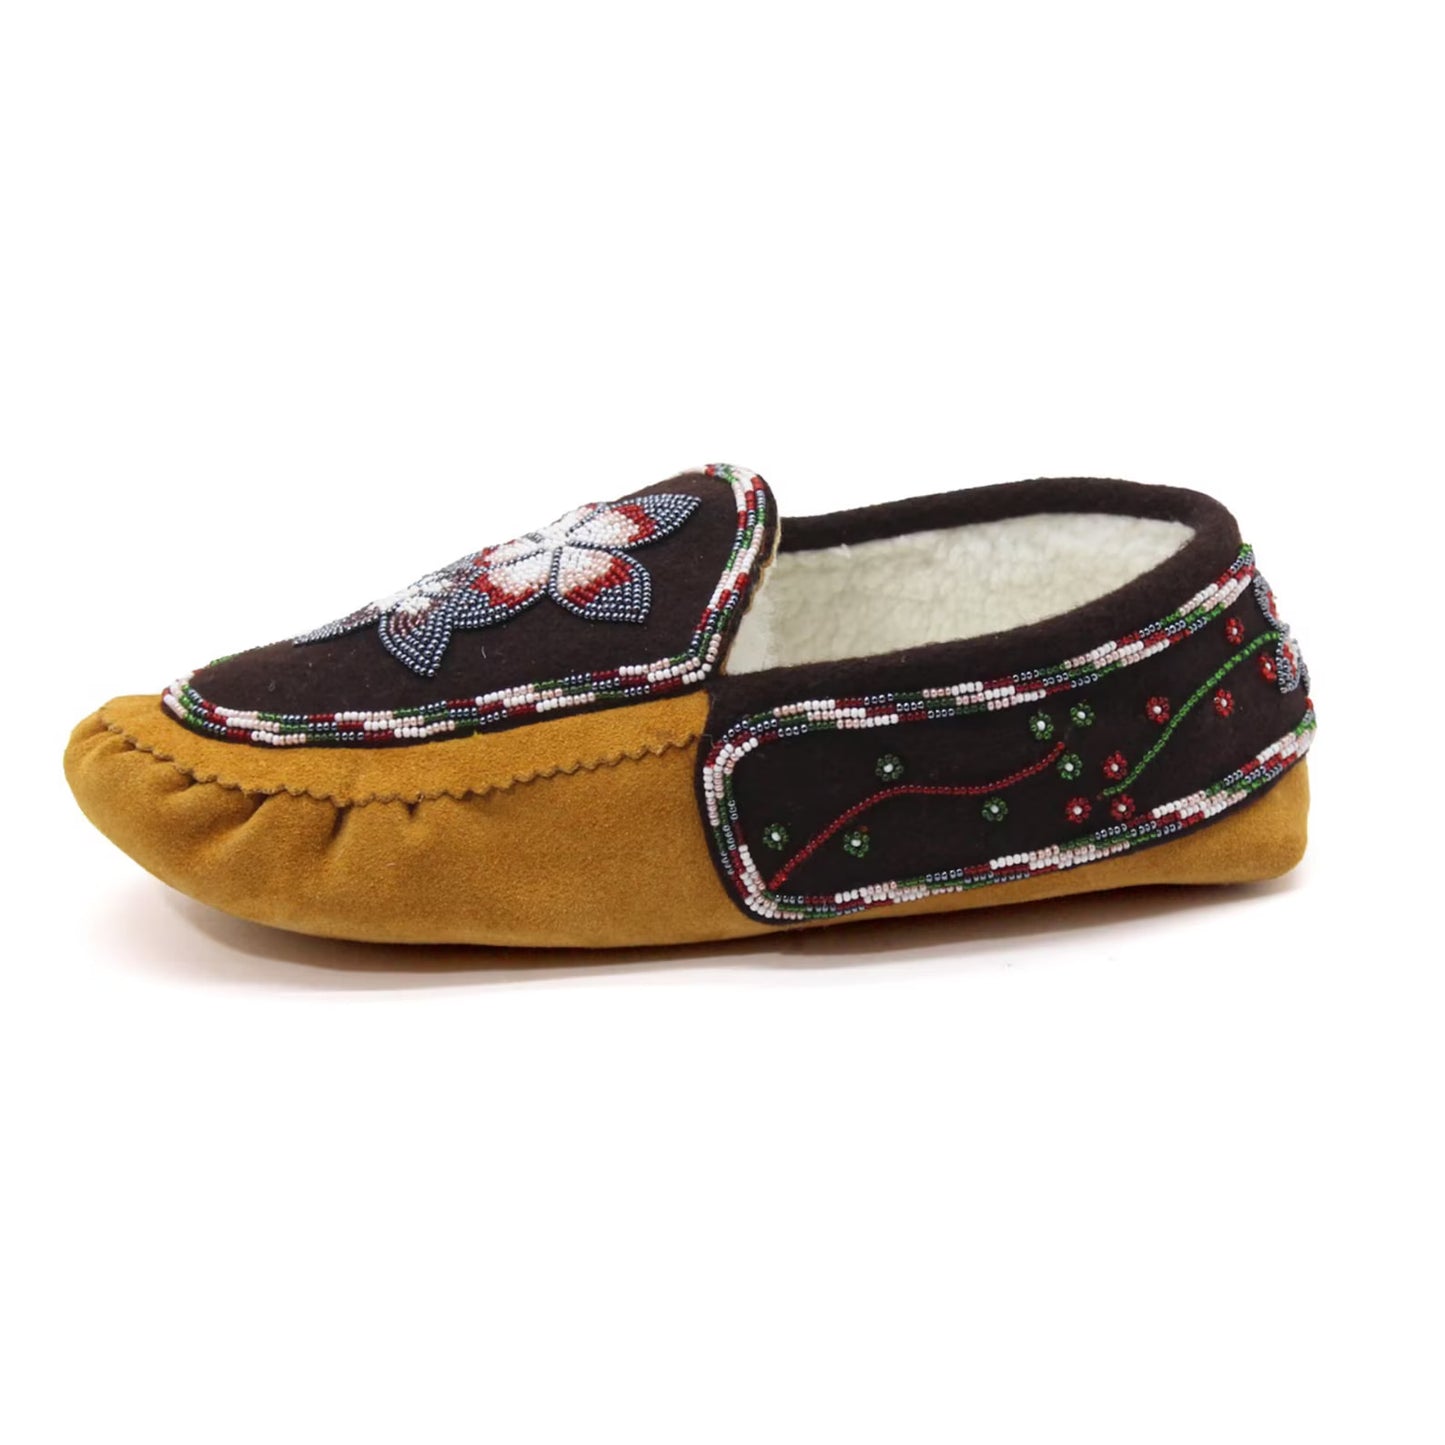 Moccasins Handmade beaded moccasins with Intricate bead-work | Genuine Leather | Brown